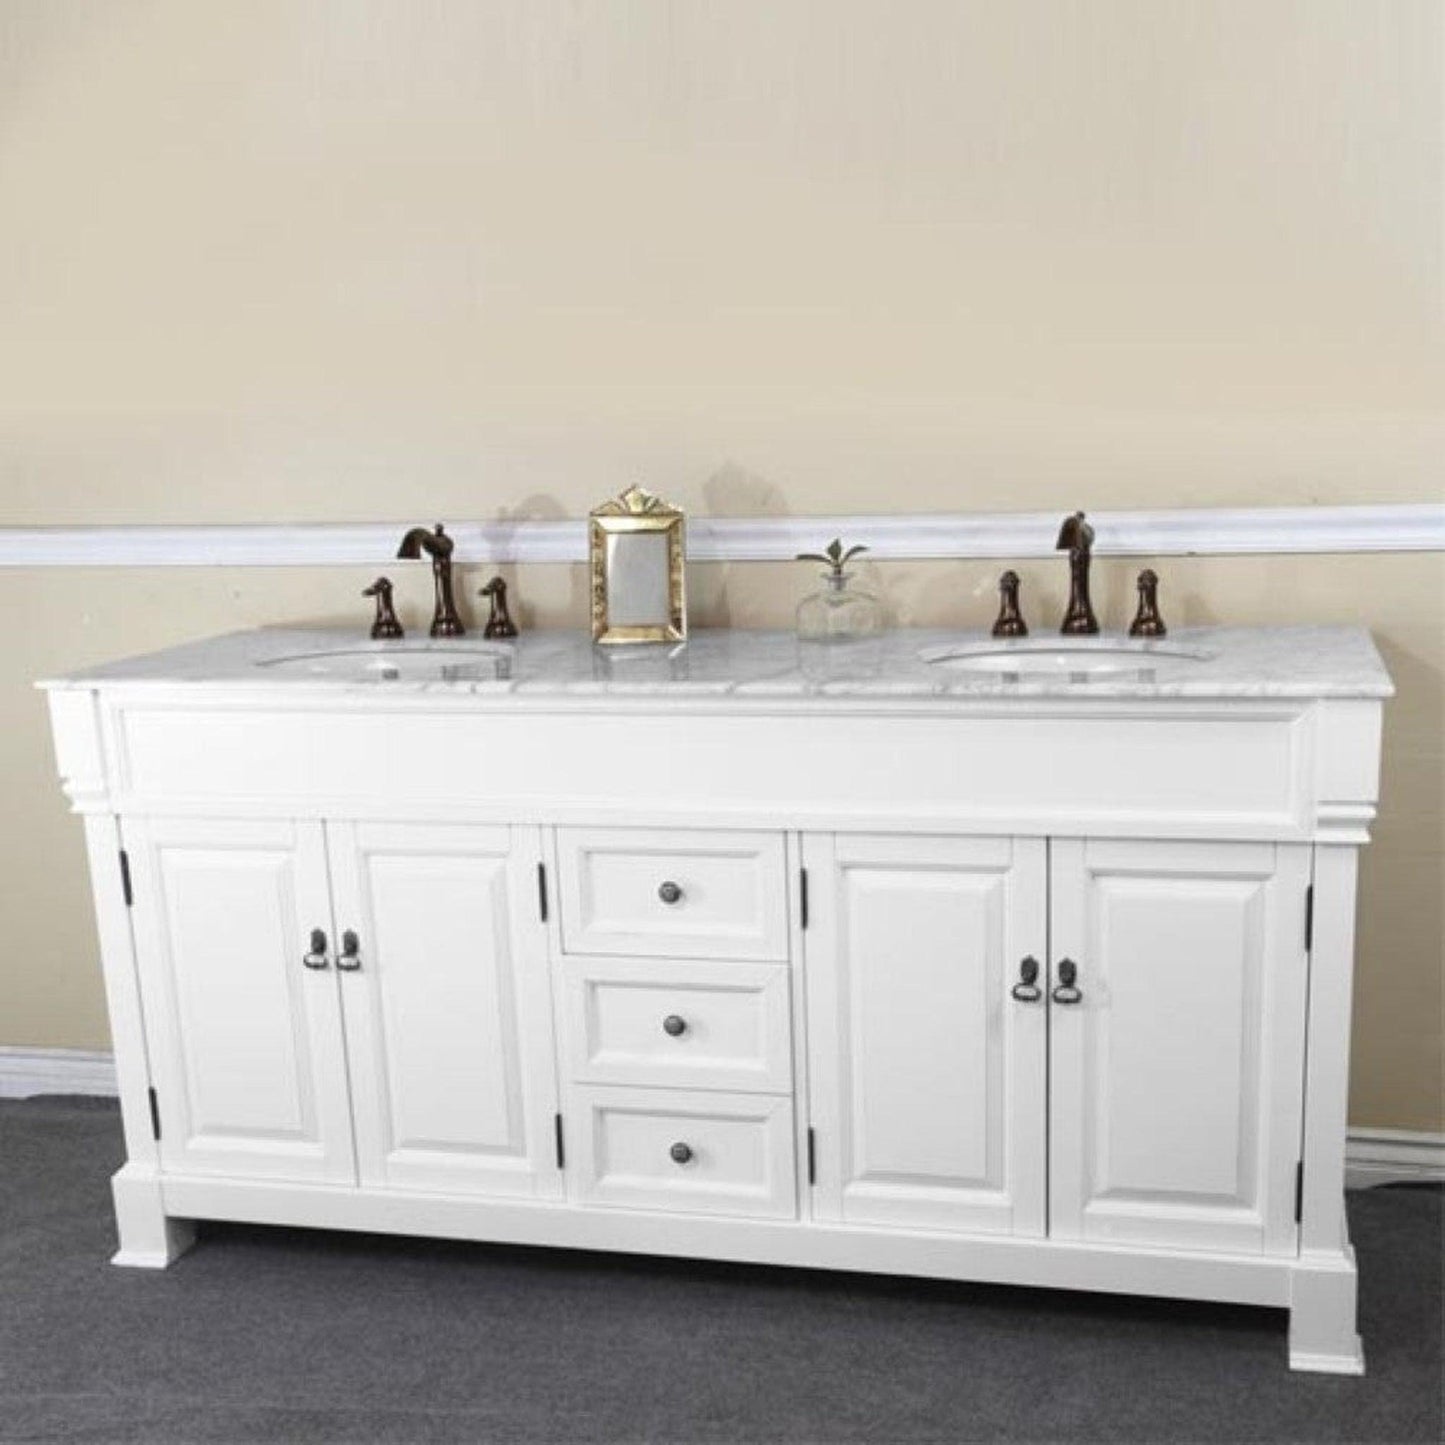 Bellaterra Home 72" 4-Door 3-Drawer White Freestanding Vanity Set With White Ceramic Double Undermount Sink and White Marble Top